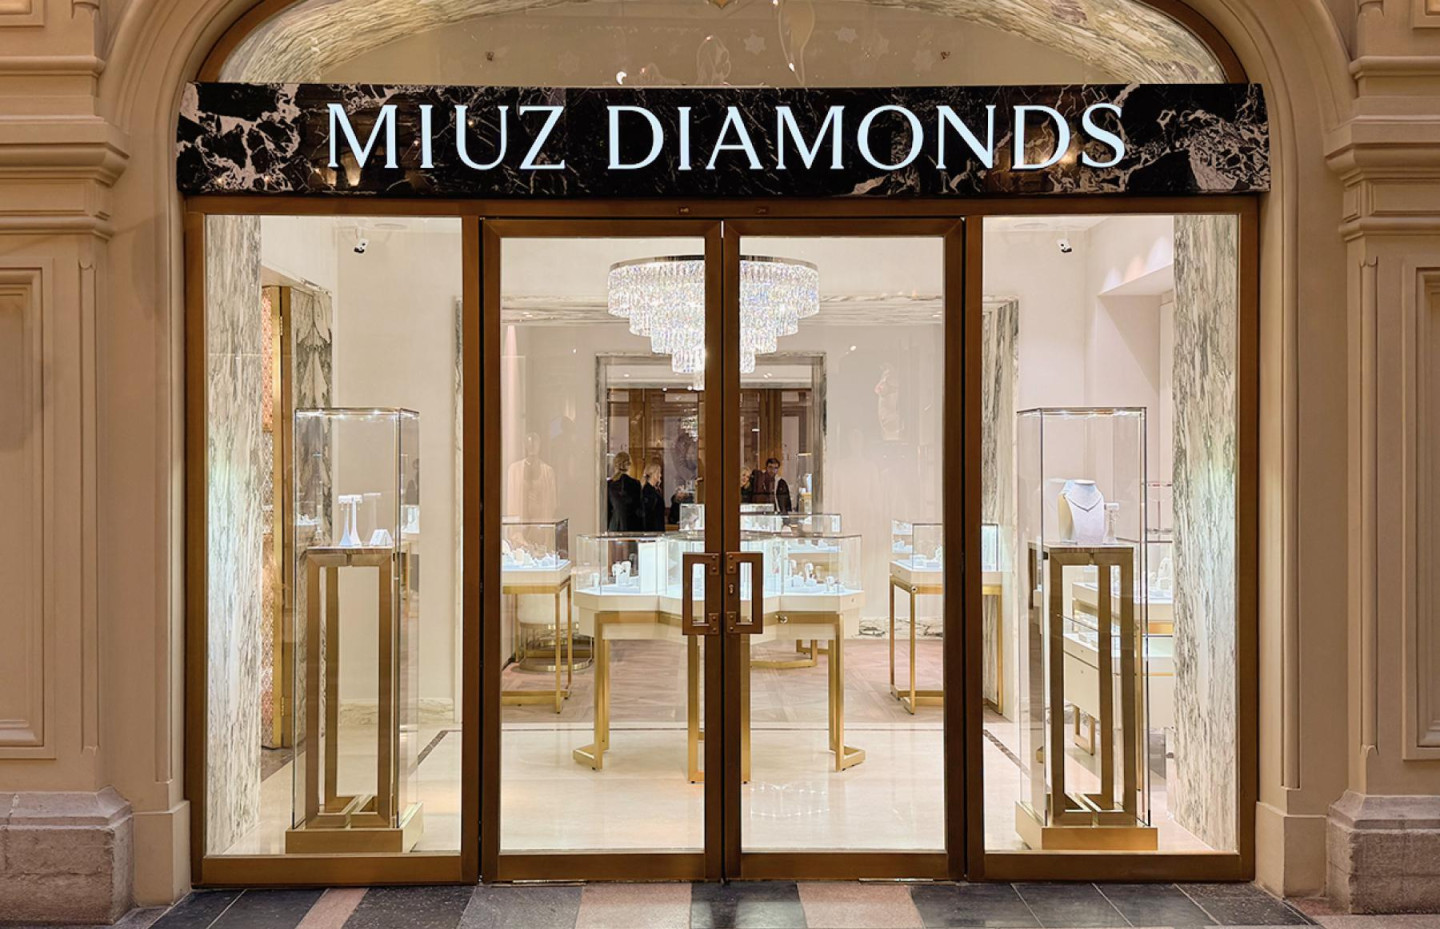 Jewelry brand MIUZ Diamonds opened a flagship store in GUM